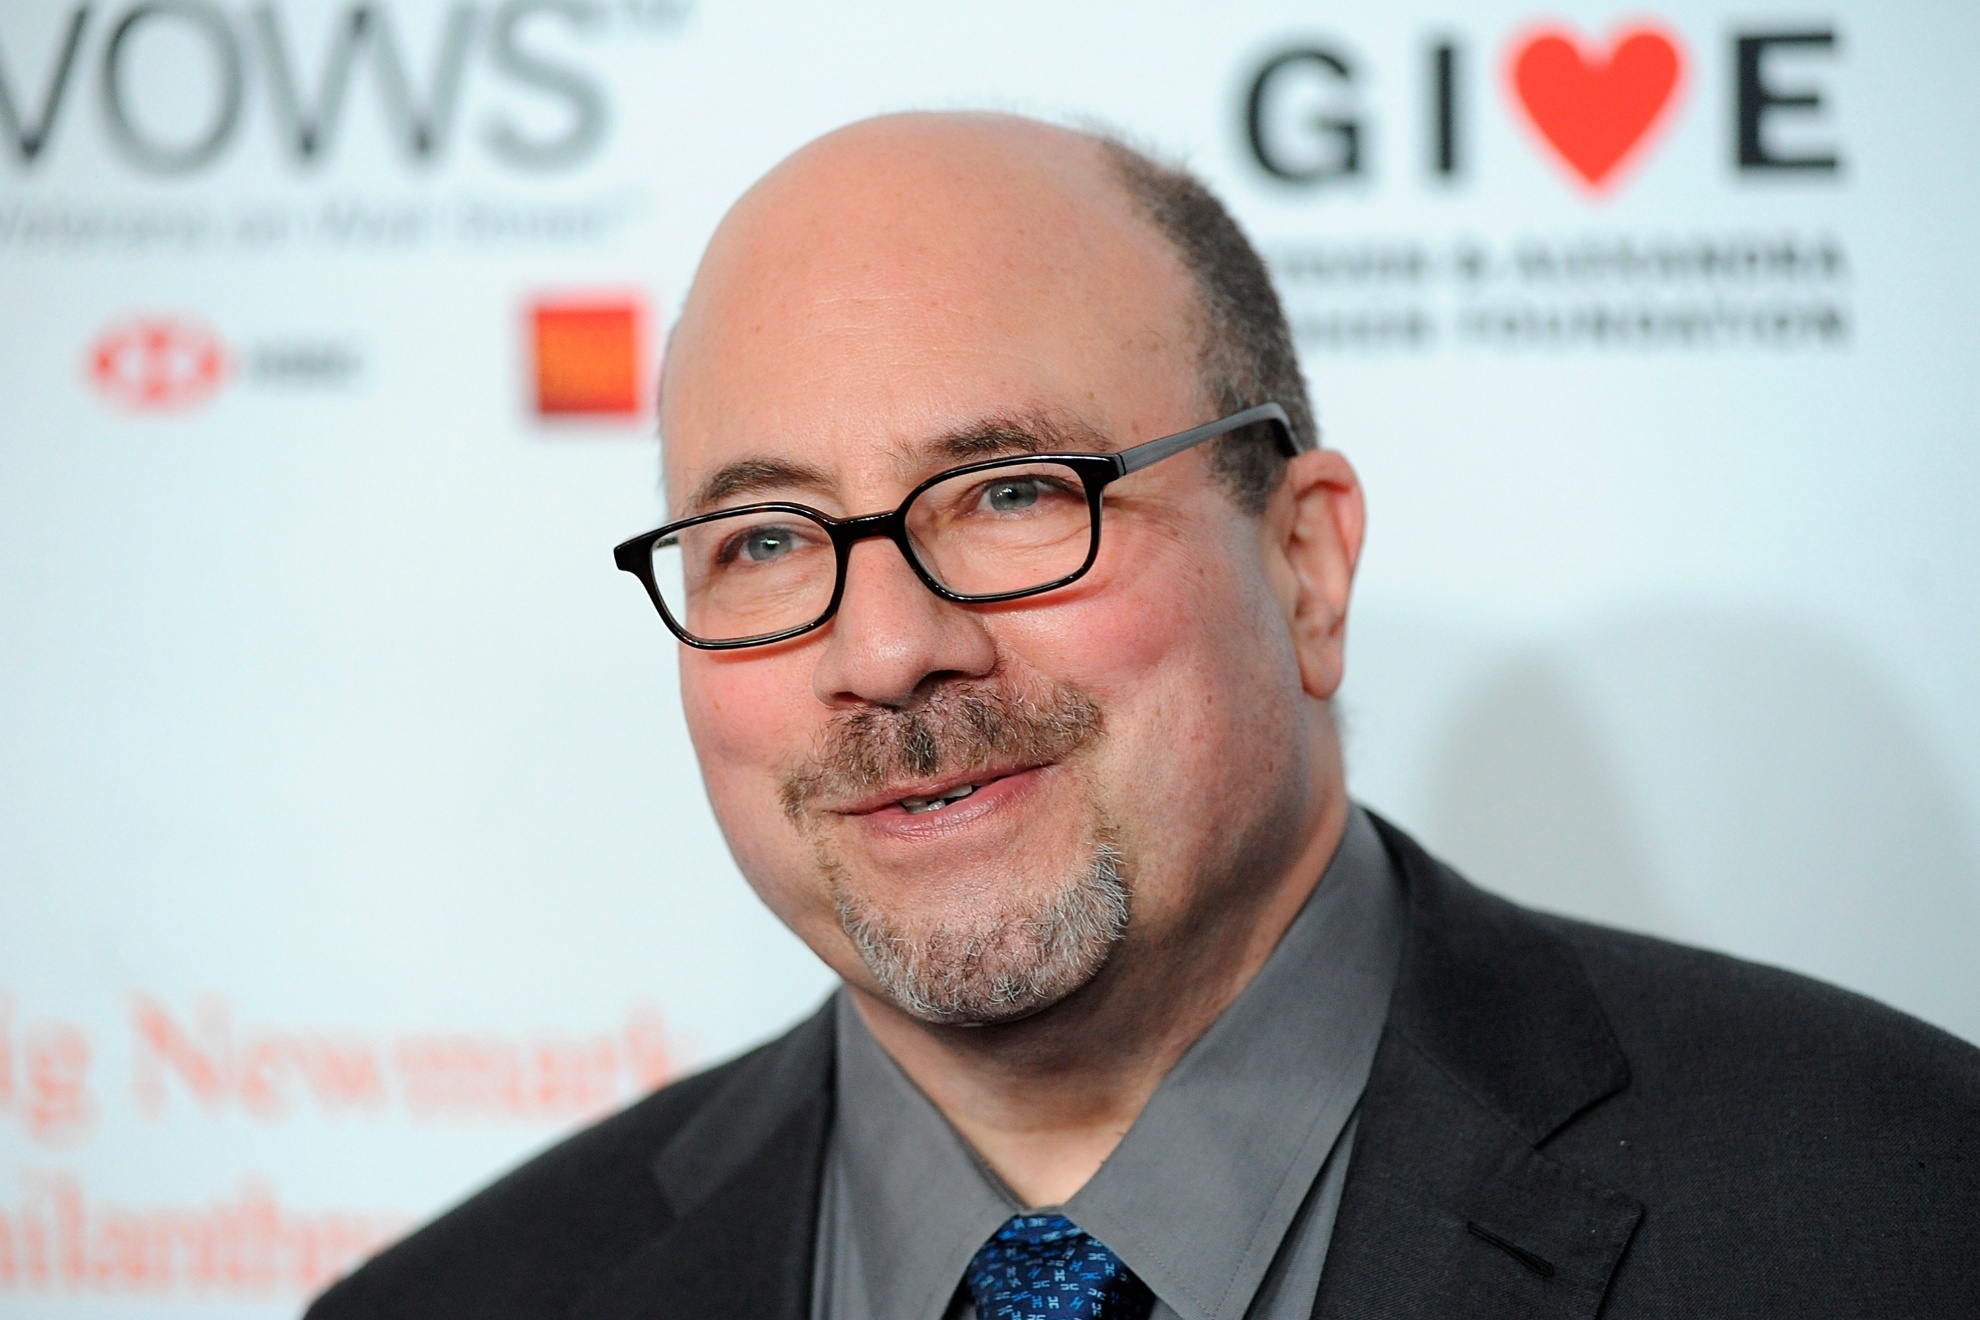 Craig Newmark Net Worth: This is how rich the philanthropist is